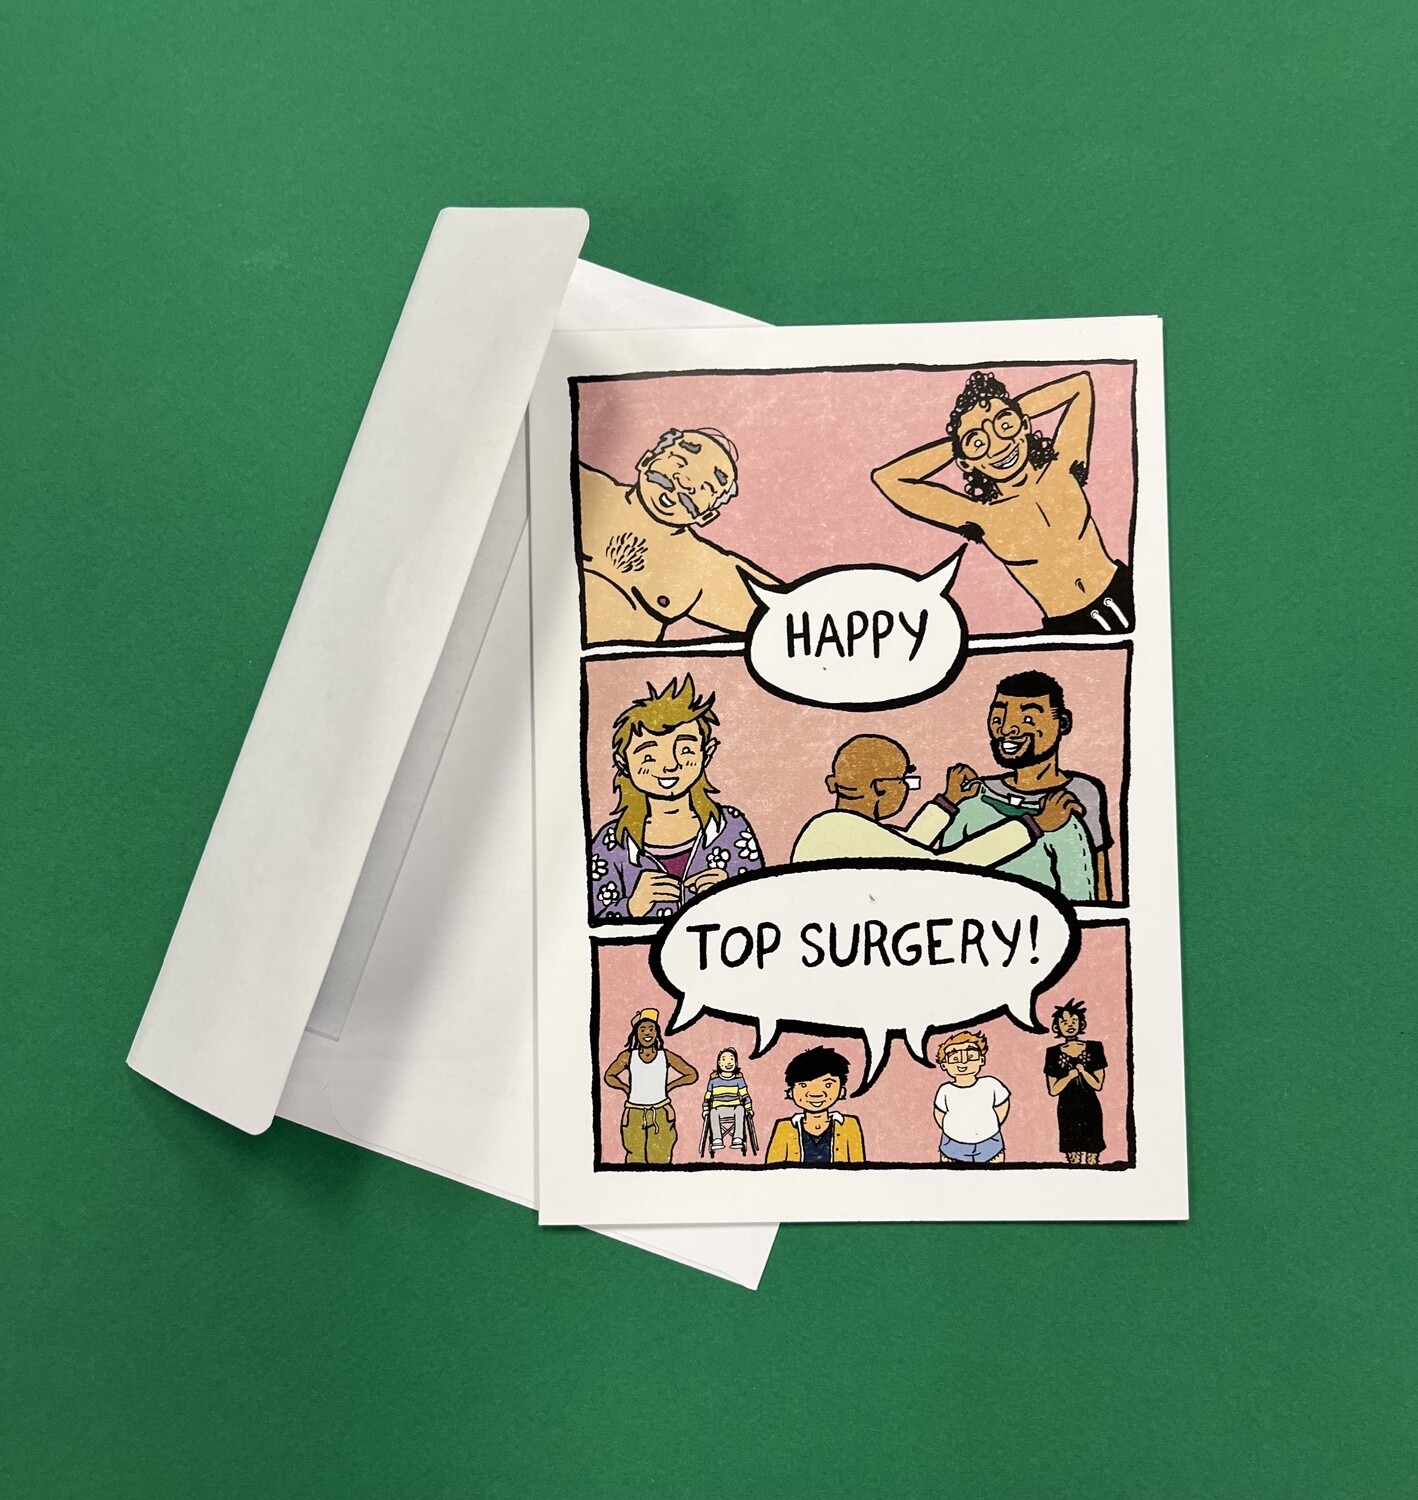 Happy Top Surgery - Greeting Car by Sarah Maloney